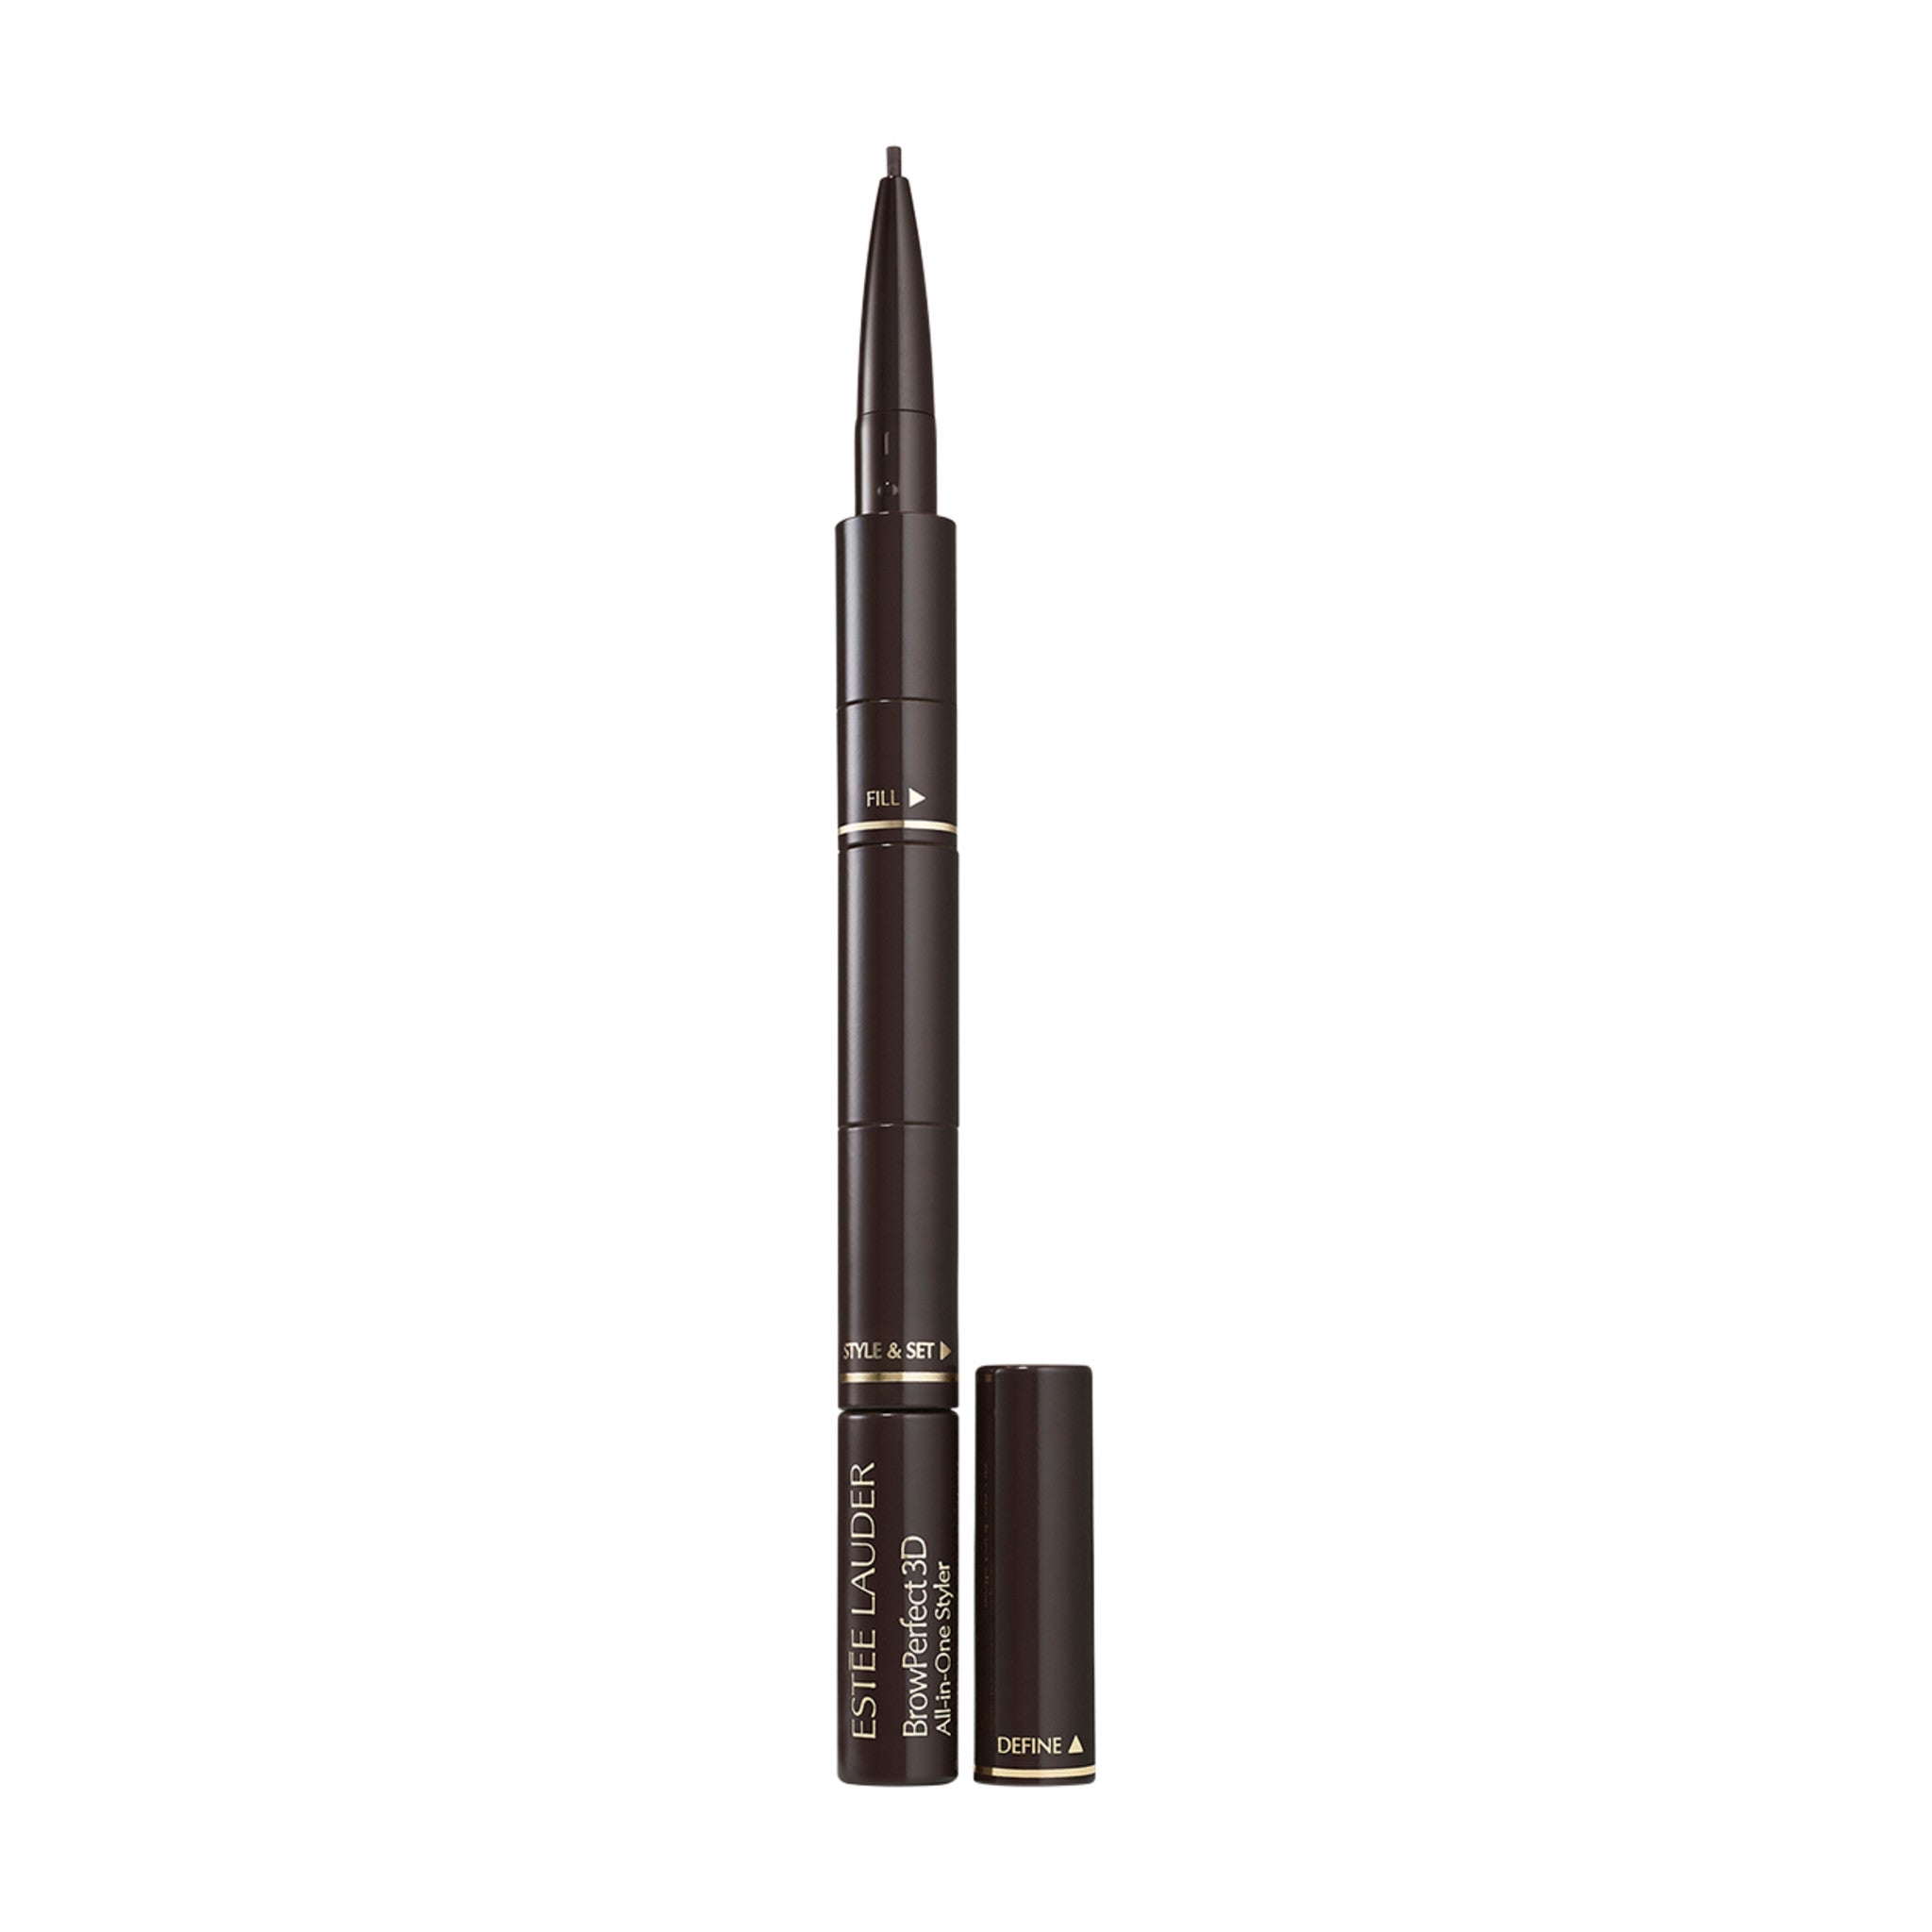 Estée Lauder BrowPerfect 3D All-In-One Styler Color/Shade variant: Blackened Brown main image.